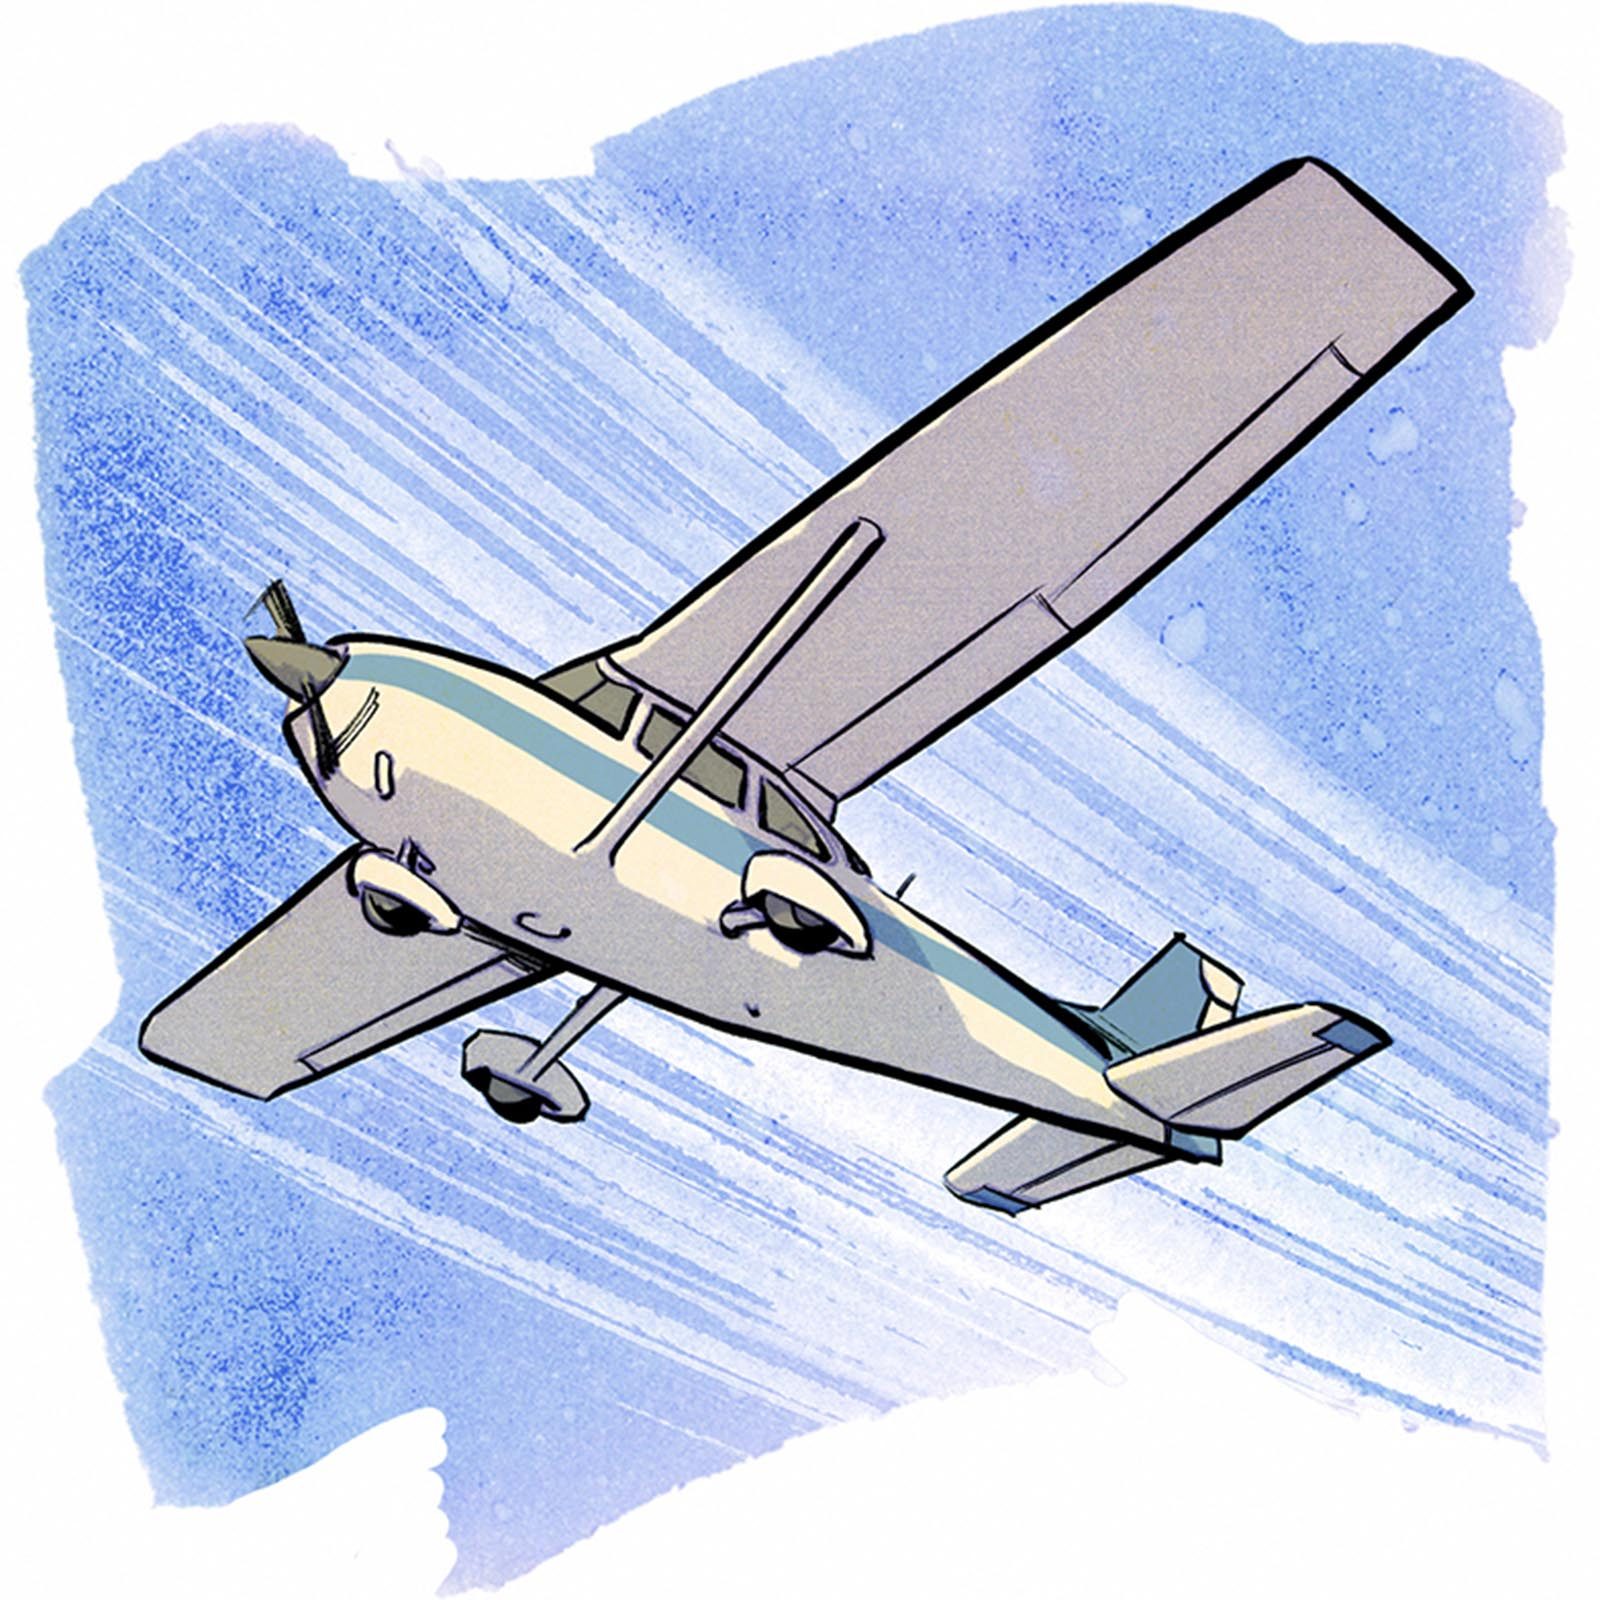 Illustration of an airplane on a blue watercolor background